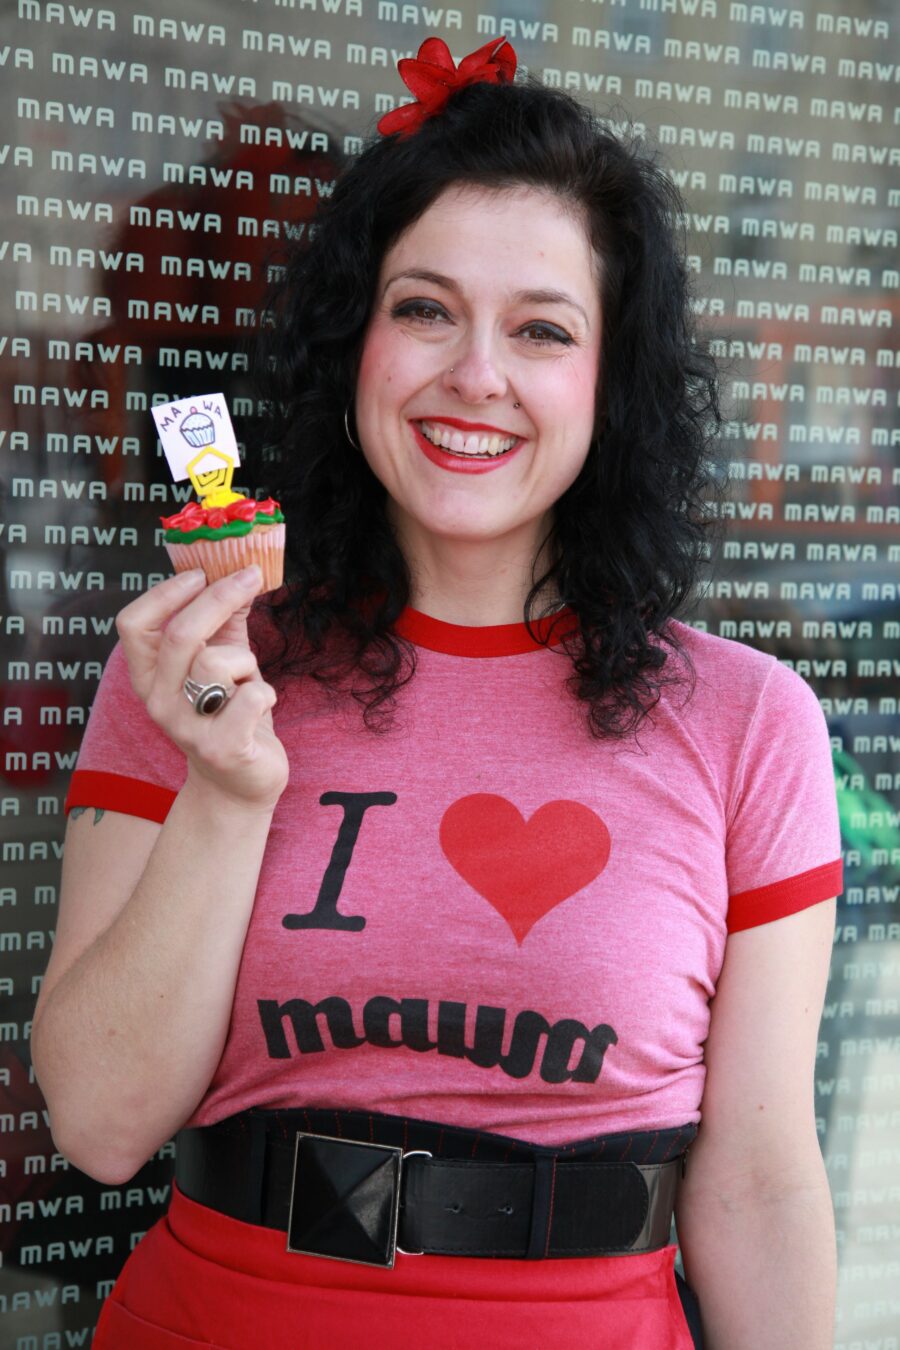 A smiling woman wears a pink t-shirt with the words I Heart MAWA on it.